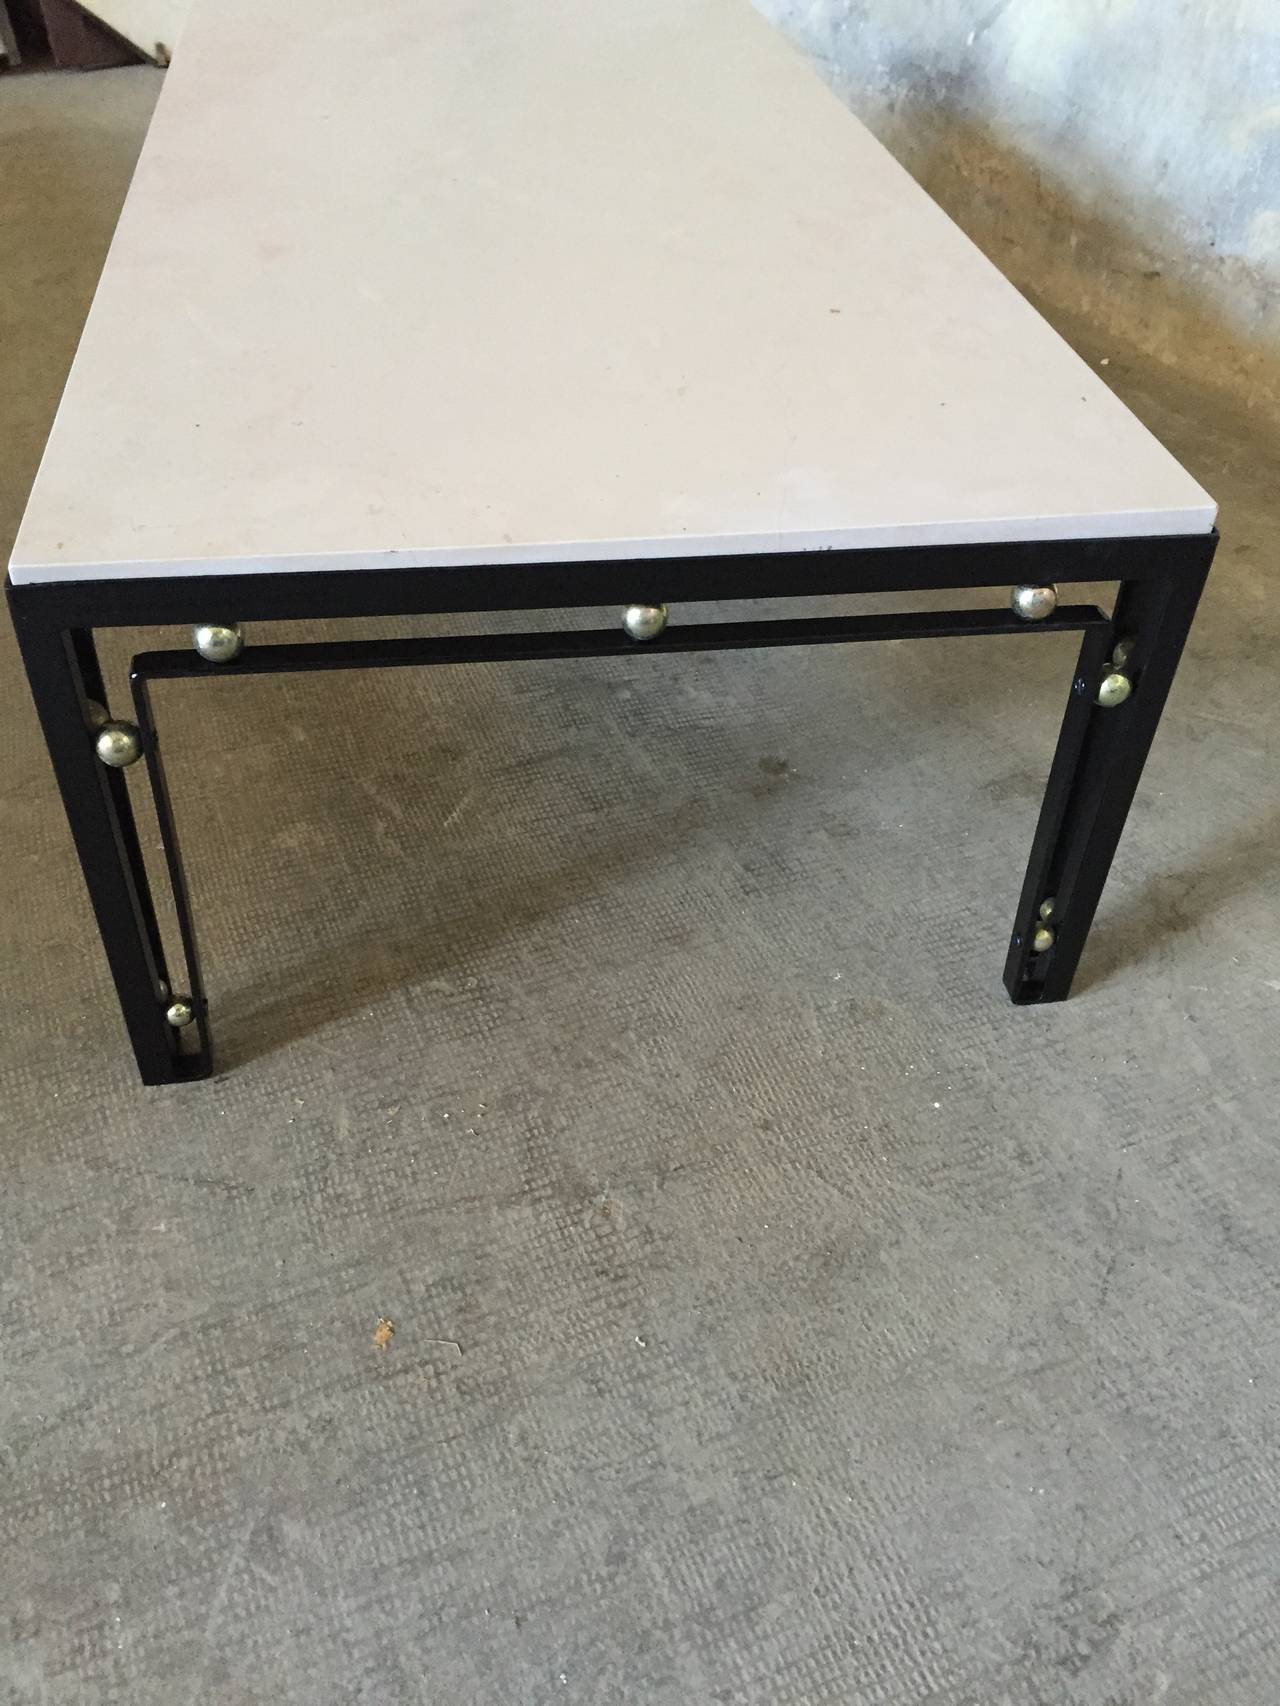 a chic 1950 low table relaquered in black ,whit stone top,a little luster on a angle and some gold balls are oxyded

Dim = 130 X 60 X 36 cm